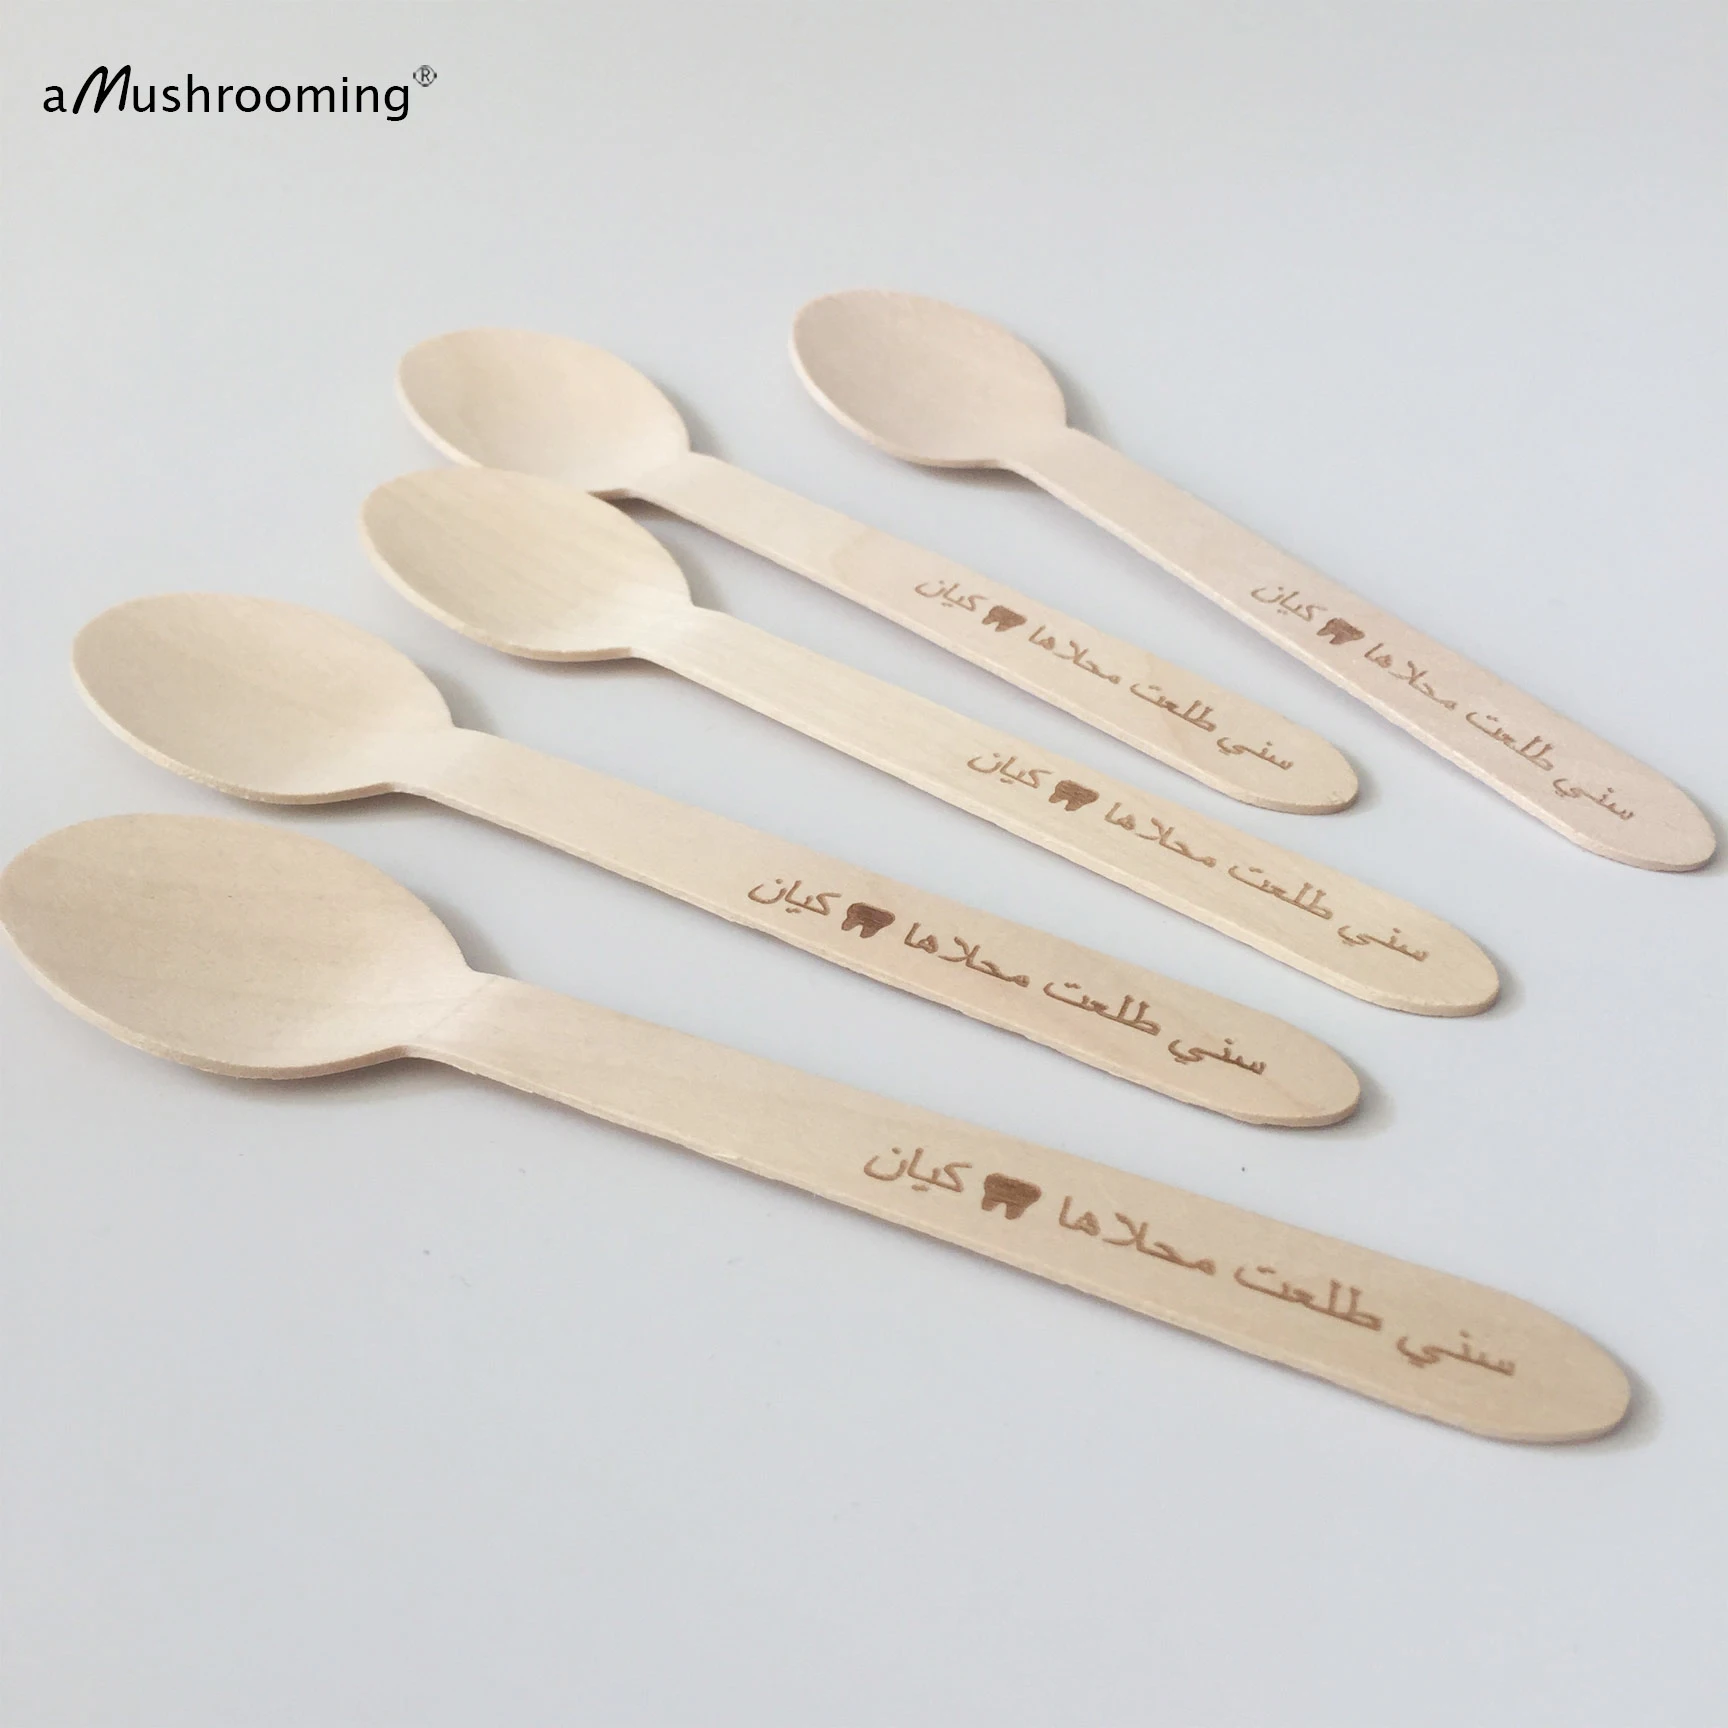 https://ae01.alicdn.com/kf/Hd5127c94247c40a2b1b1e38c19e9e1adT/25pcs-Baby-First-Tooth-Birthday-Party-Ice-Cream-Dessert-Spoons-with-Text-Baby-Boy-Girl-Shower.jpg